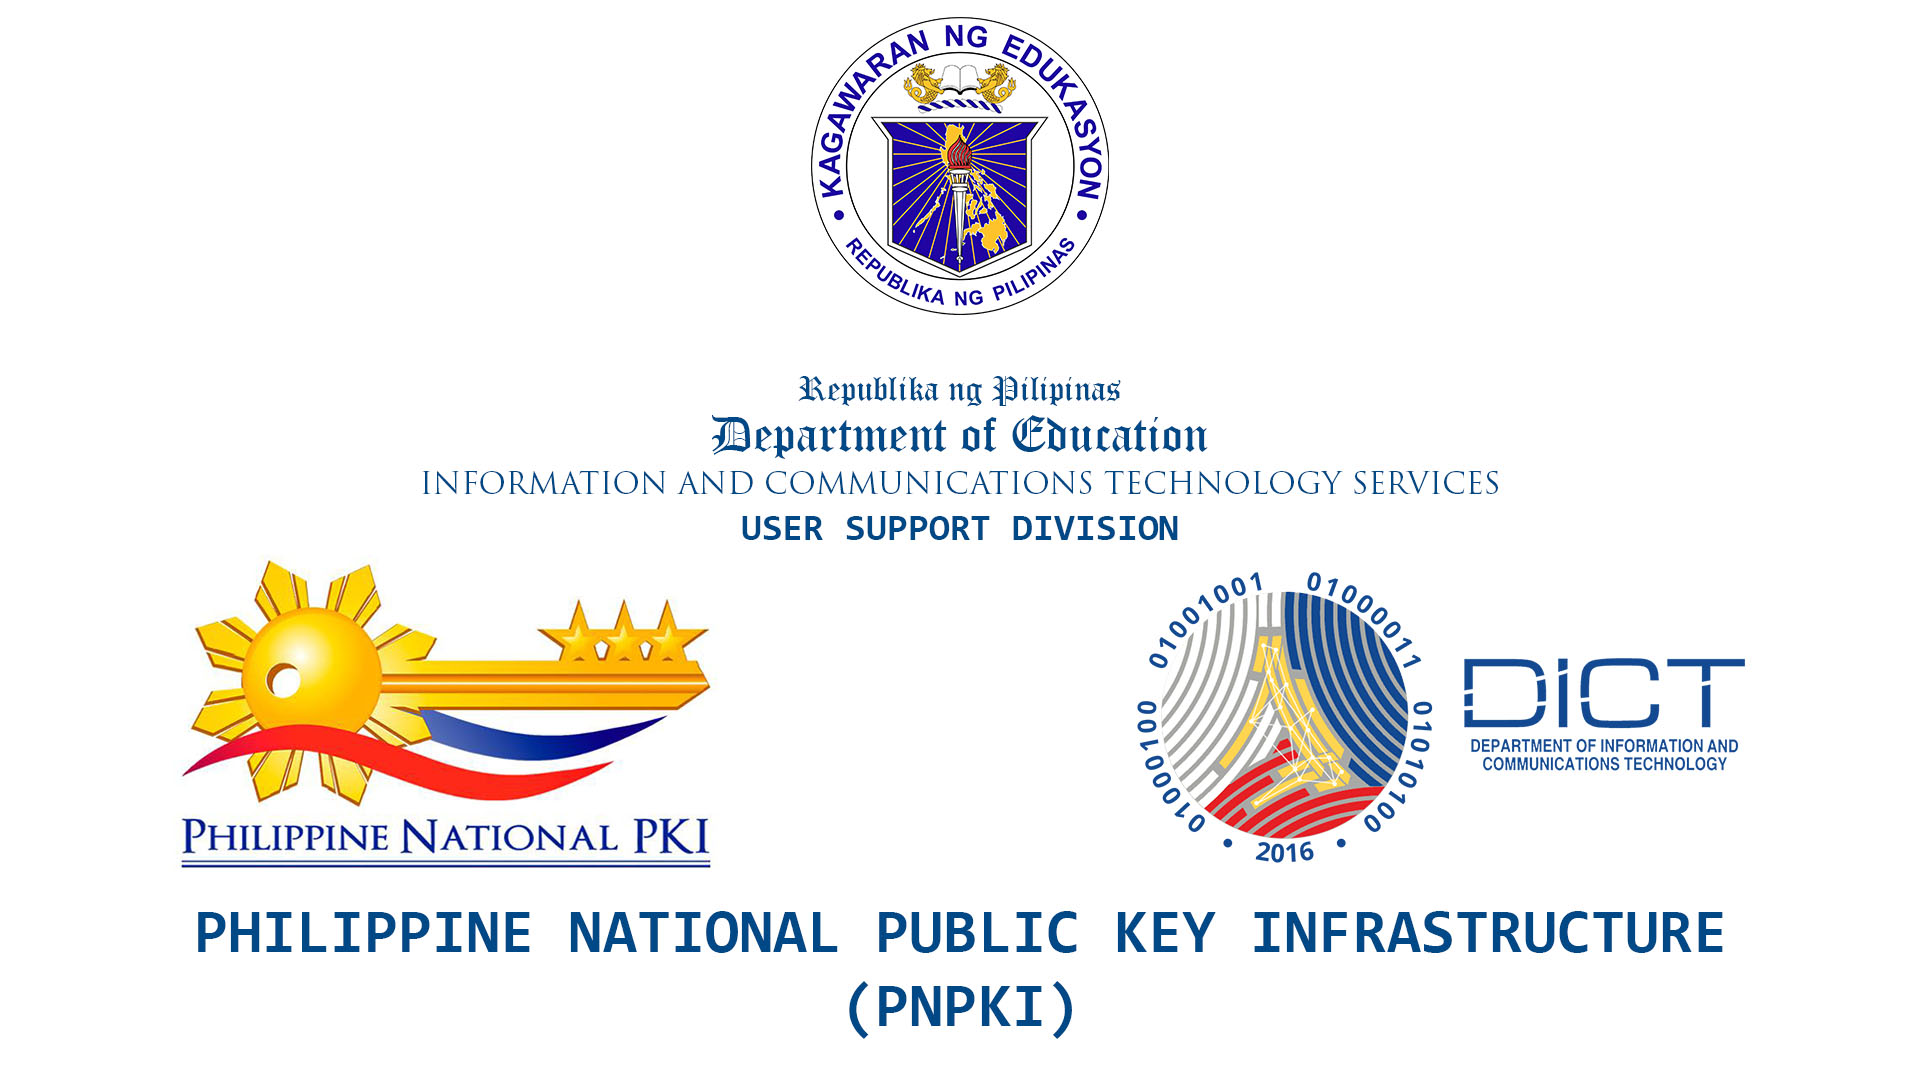 Iloilo 2nd Congressional District - Facility for the Submission of the Application Requirement for the PNPKI Digital Certificate of DepEd Personnel in the Field Offices